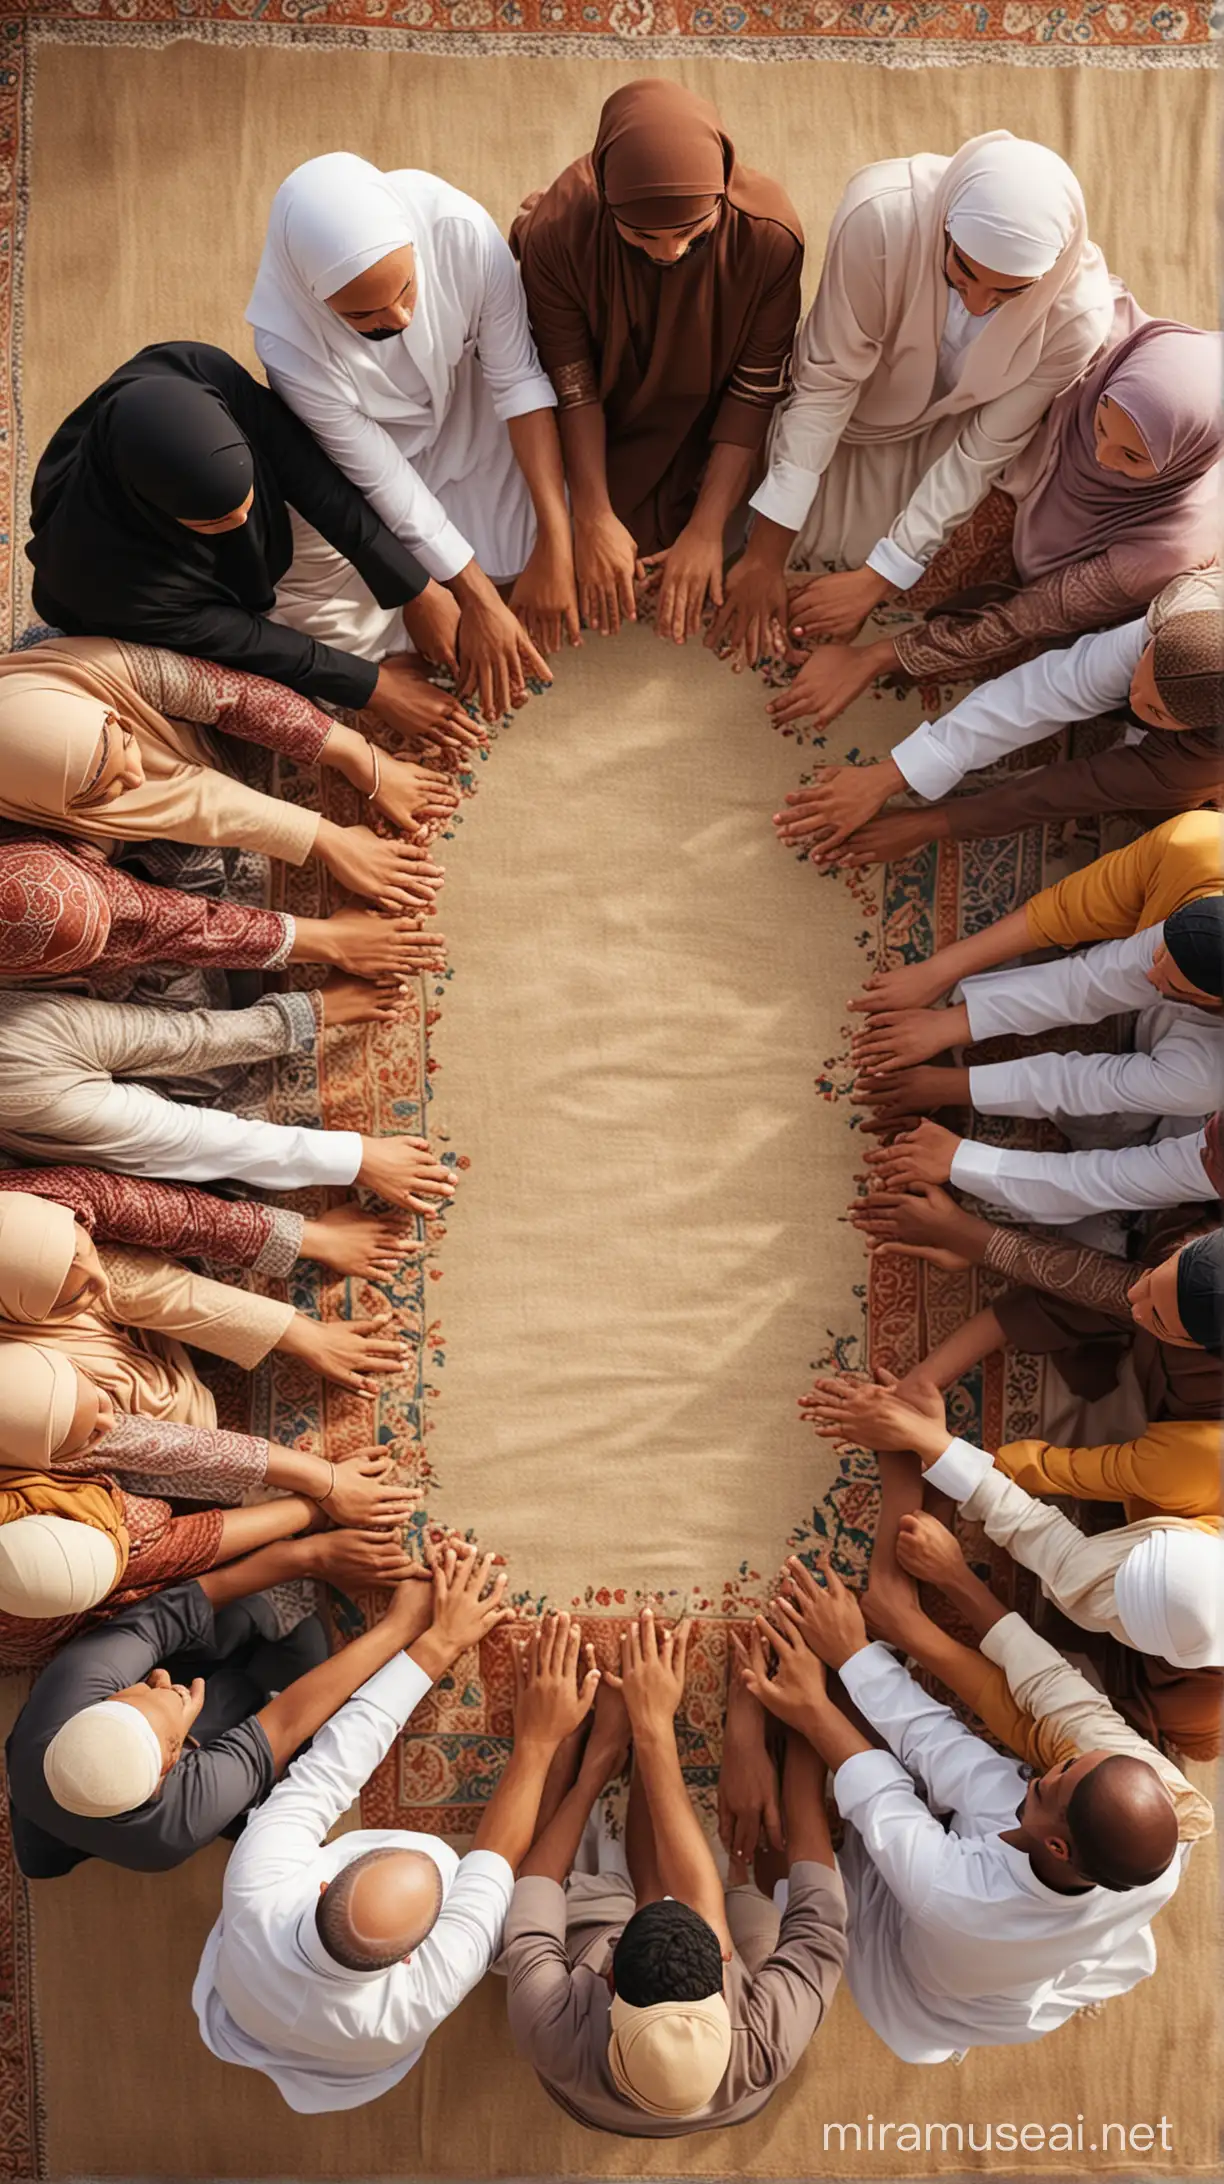 A Vibrant Tapestry of Unity: Depict a diverse group of Muslims from various ethnicities and cultures, holding hands in a circle, symbolizing their unity despite differences. HD 4k islamic way